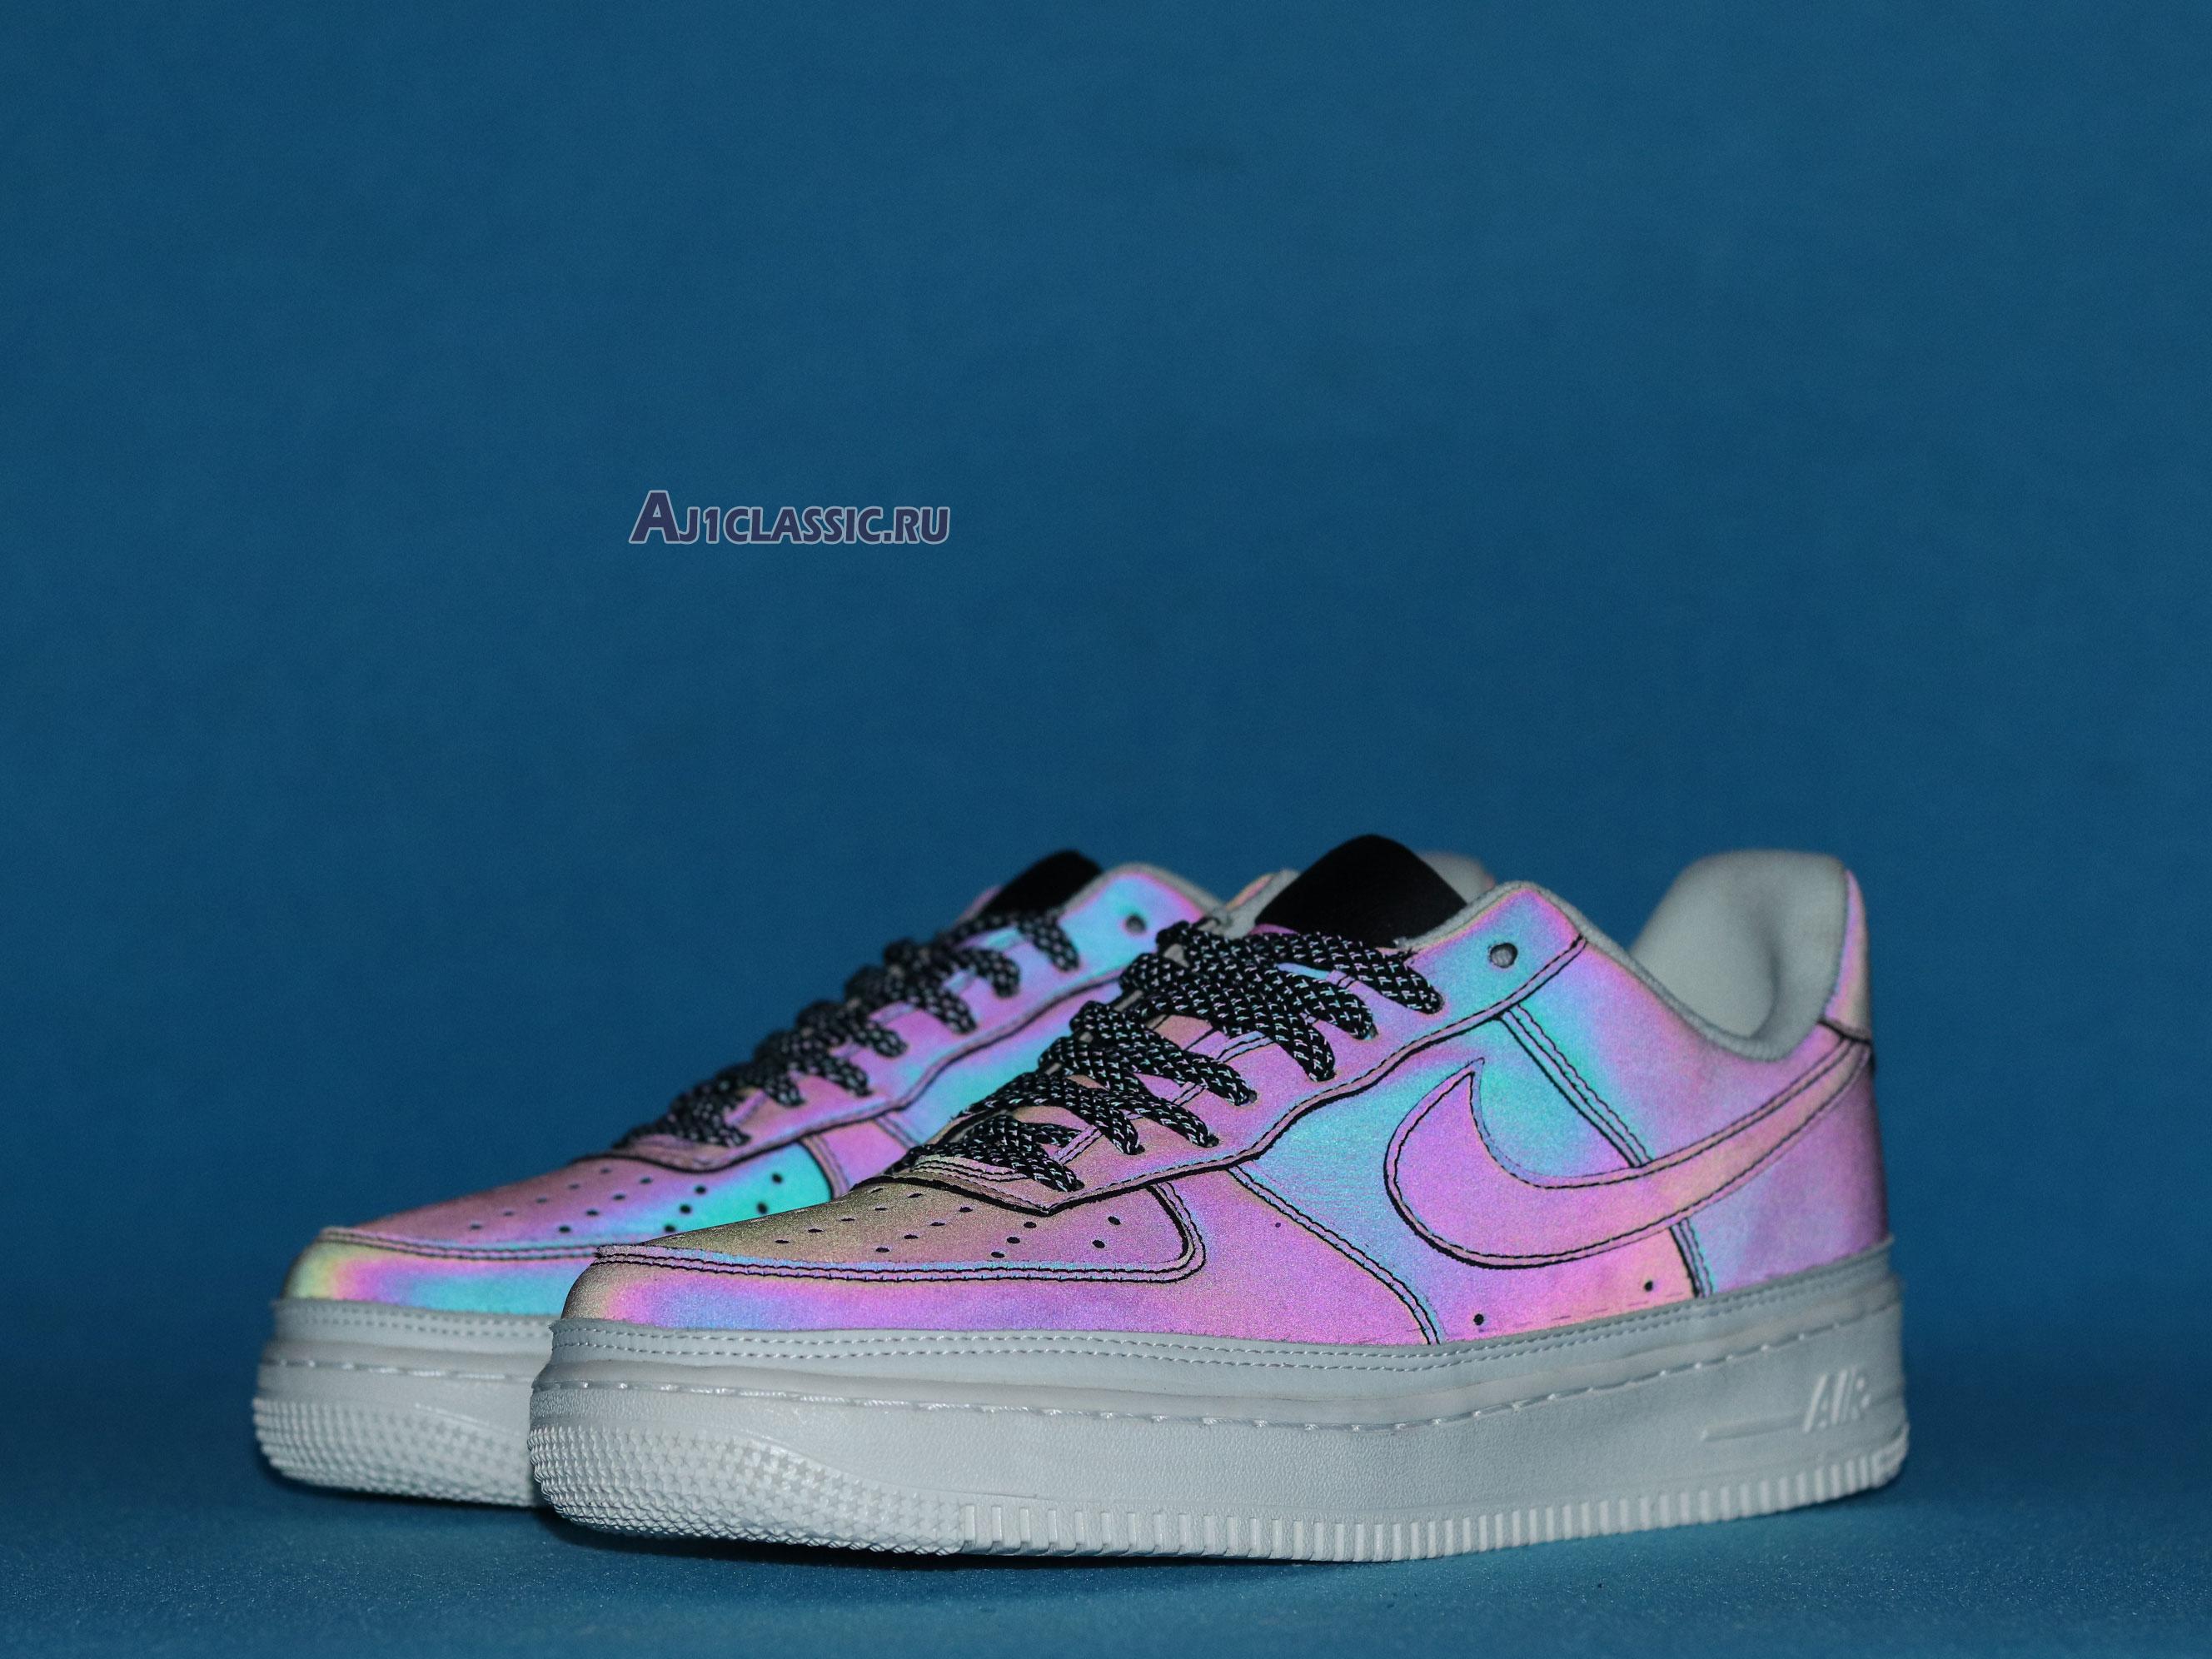 Nike Air Force 1 Low 07 Demon "Chameleon" AT4143-611